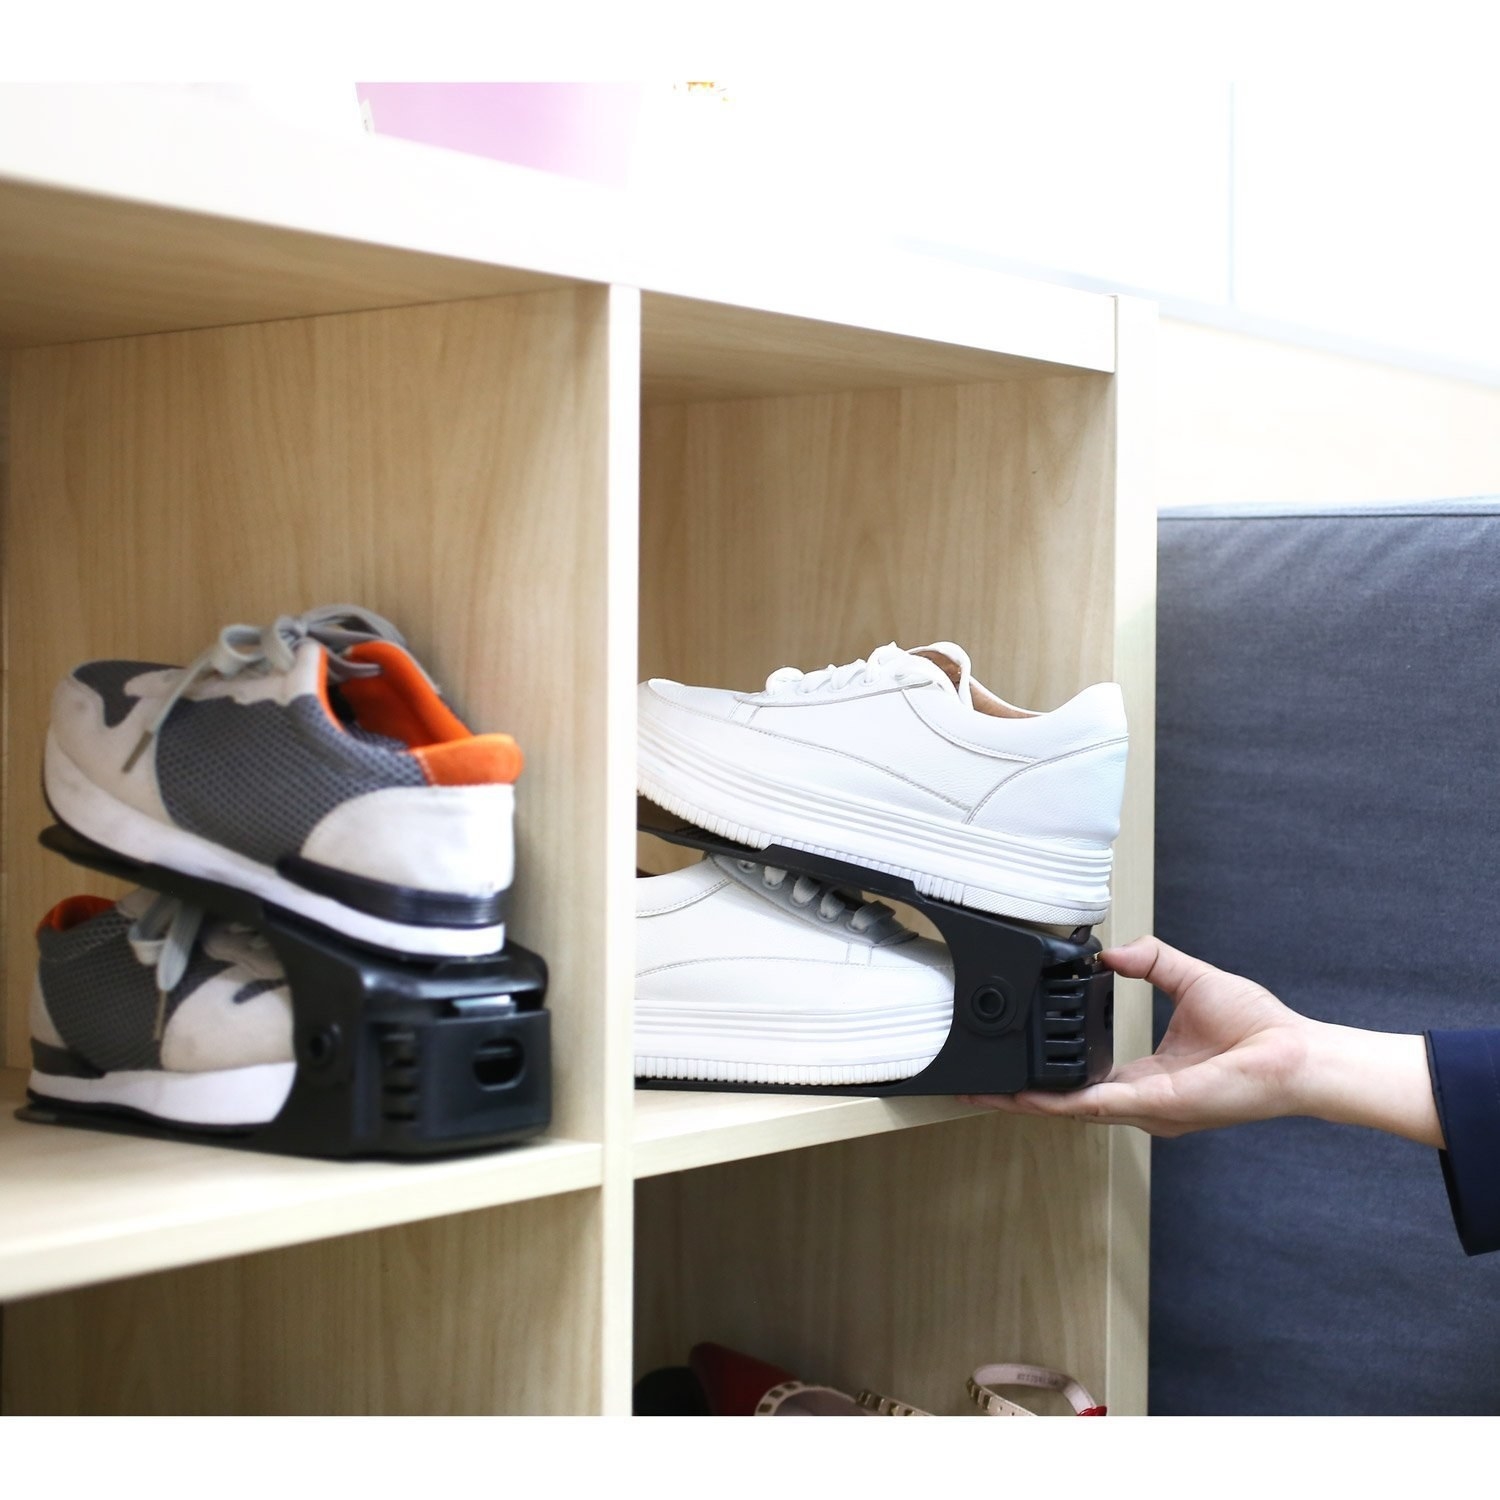 Shoes being placed in the shoe organiser in square shelves. The organisers are designed to store one shoe on top of the other.